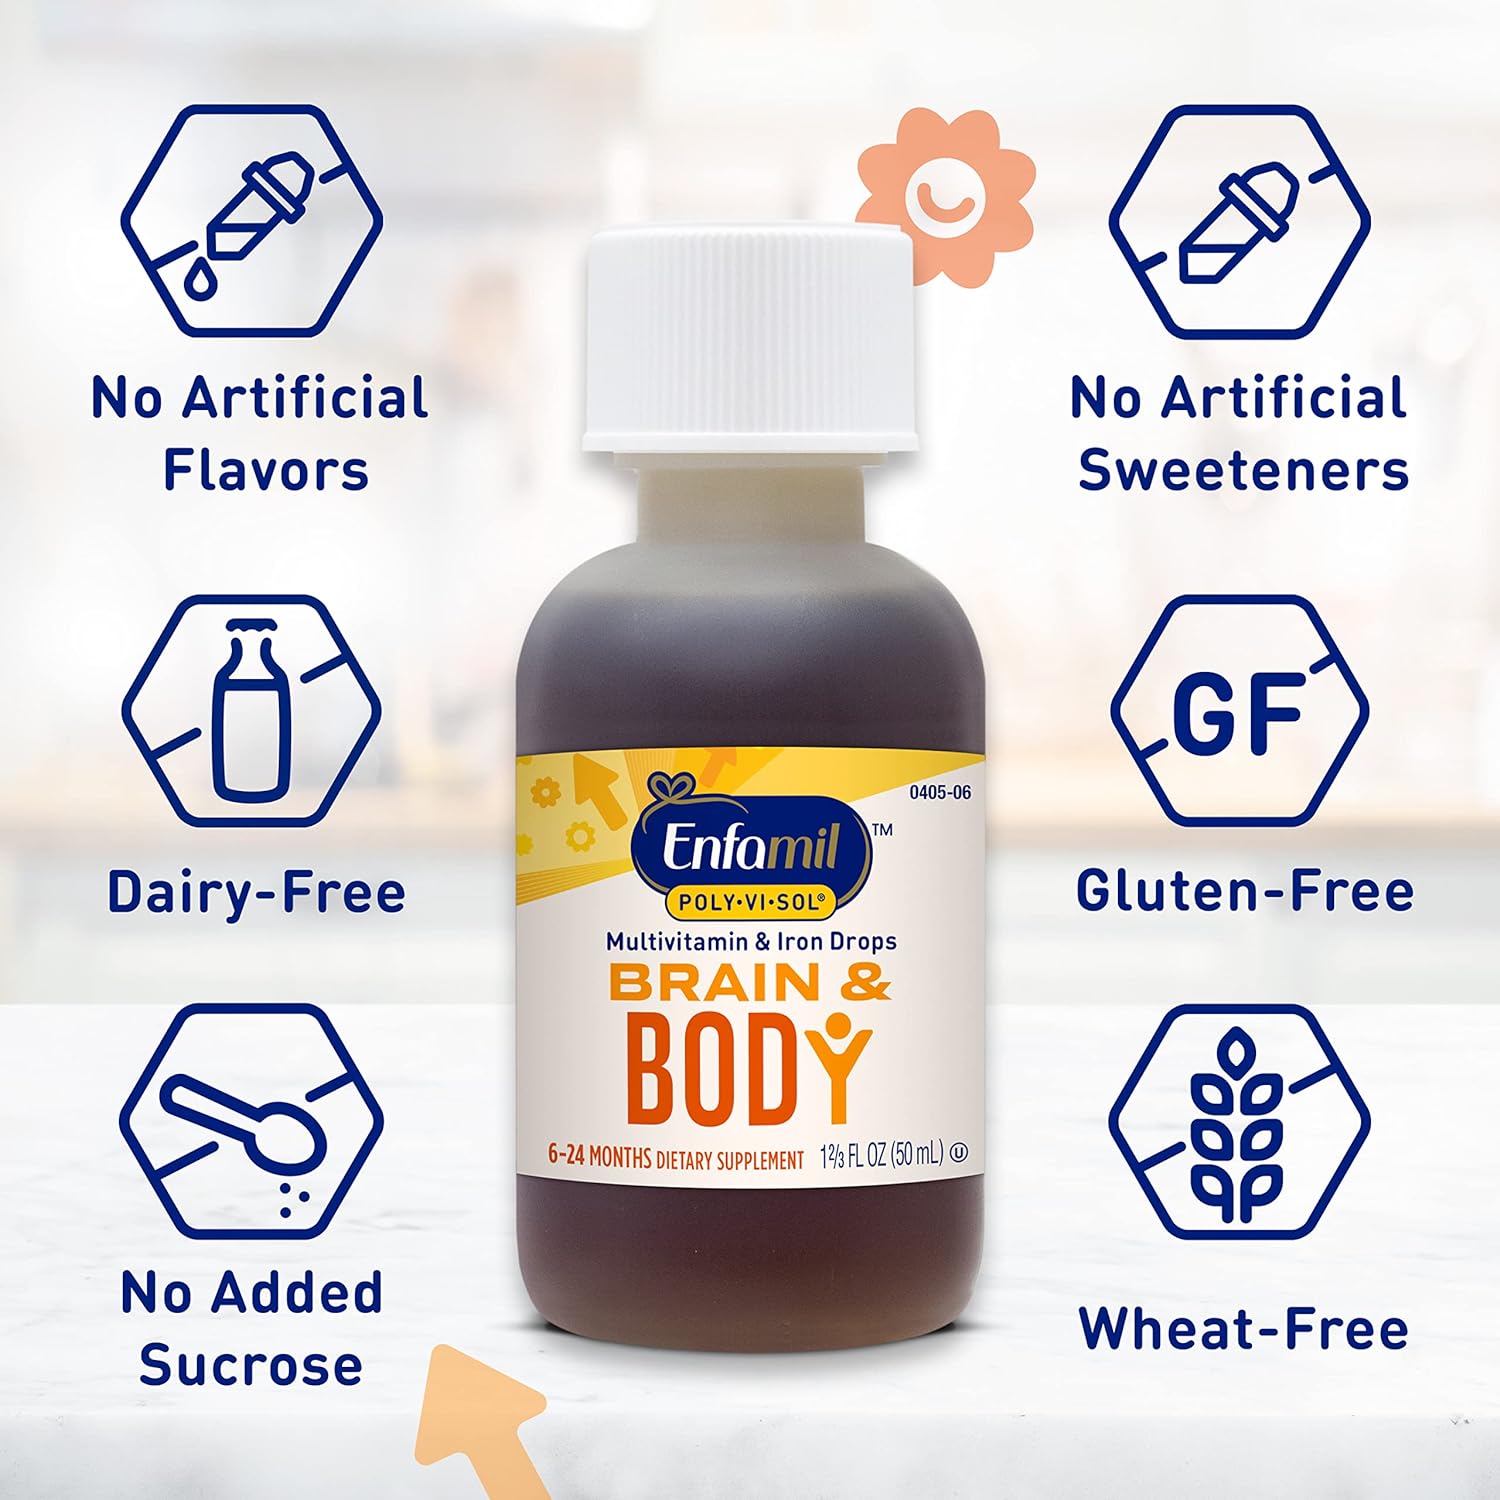 Enfamil Prenatals & Baby Vitamins Poly-Vi-Sol 8 Multi-Vitamins & Iron Supplement Drops for Infants & Toddlers, Supports Growth & Development, 50 mL Dropper Bottle